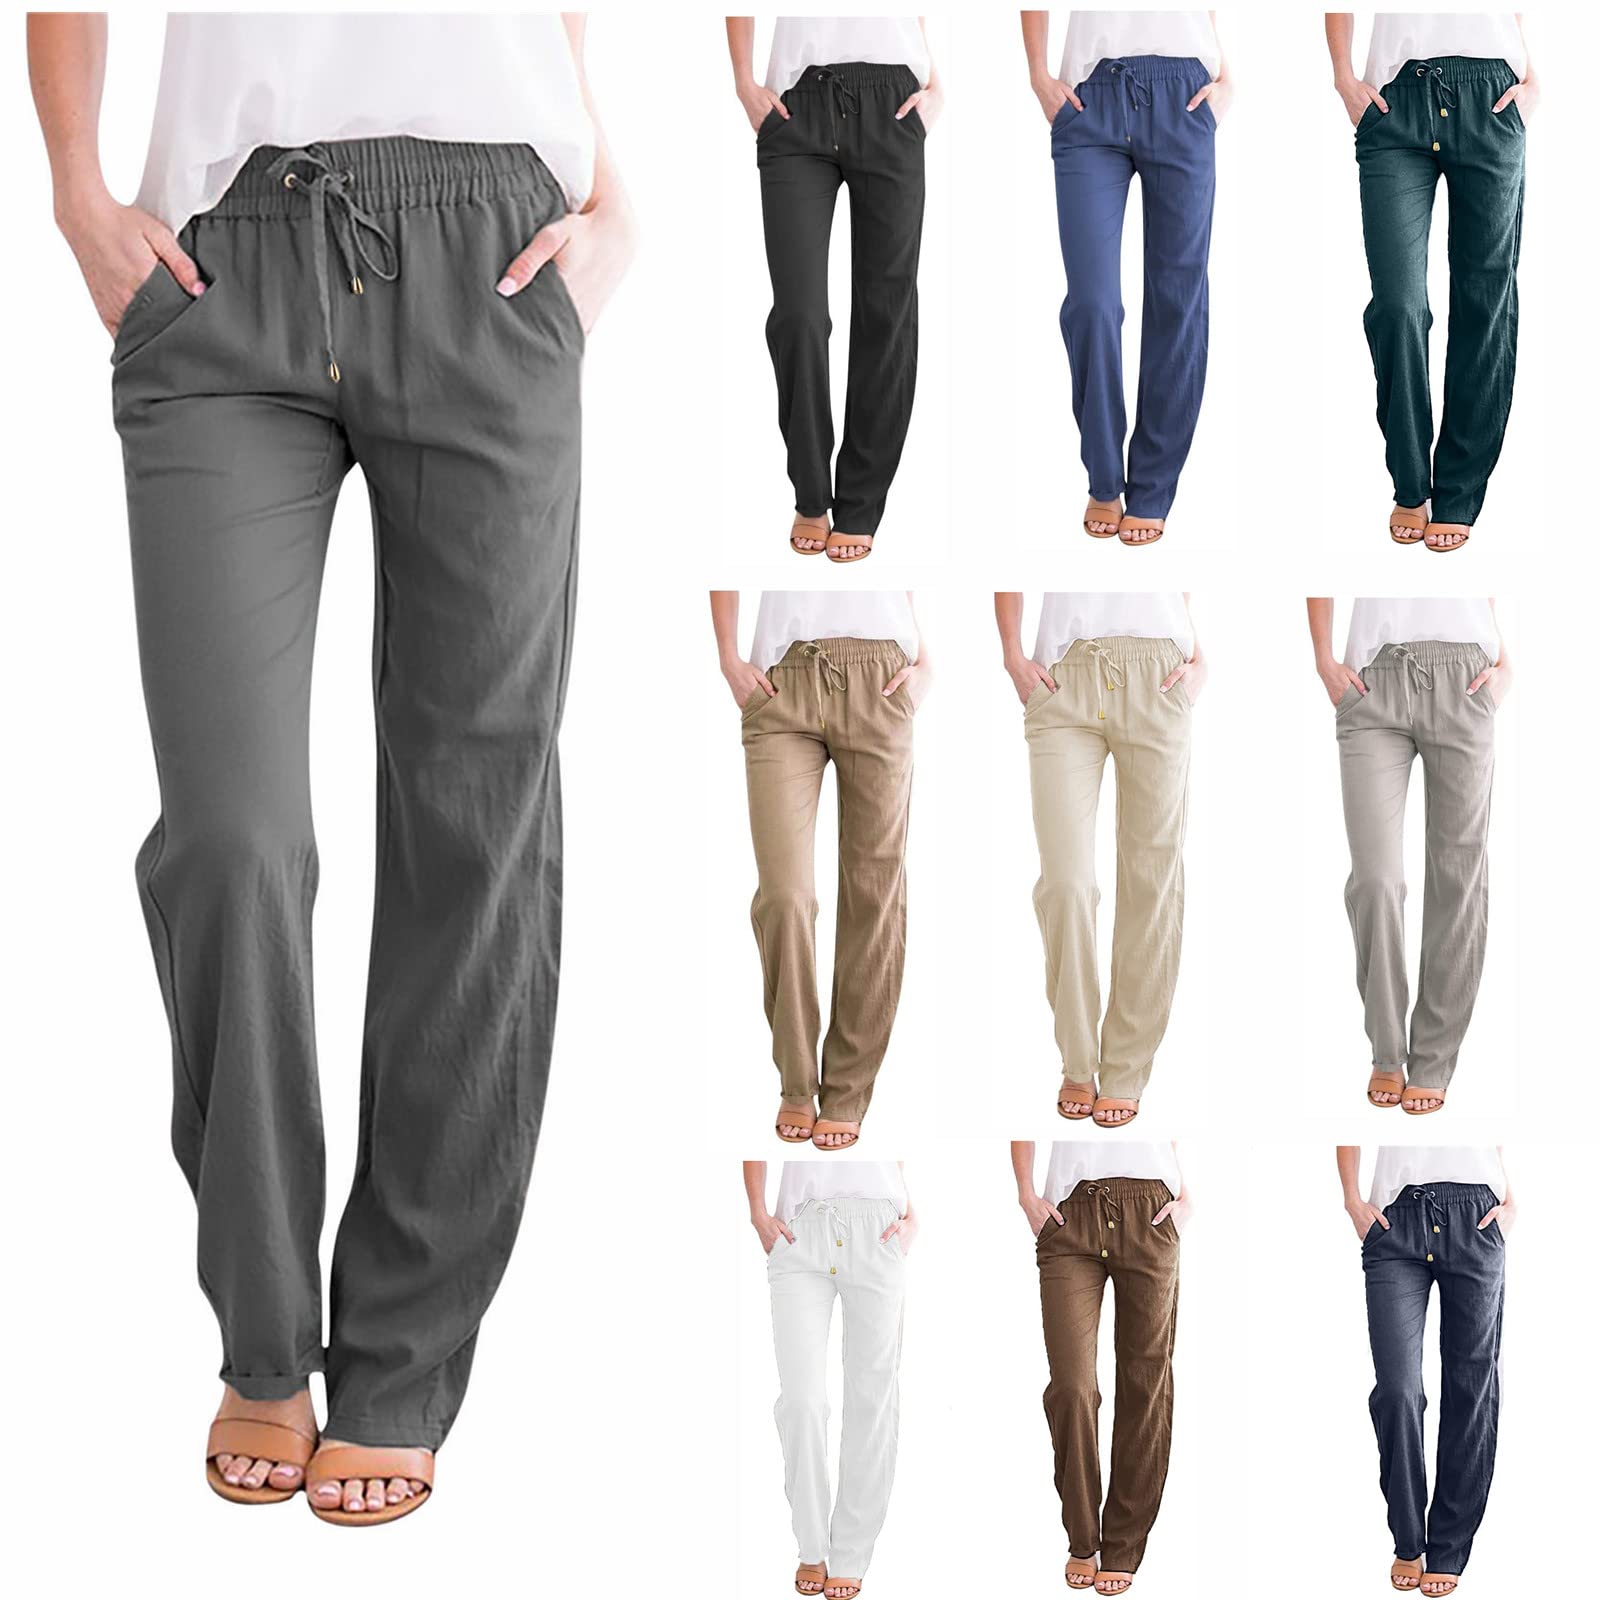 Womens Fall Fleece Cinch Bottom Sweatpants Comfy Y2K High Waisted Workout  Athletic Lounge Joggers Pants with Pockets